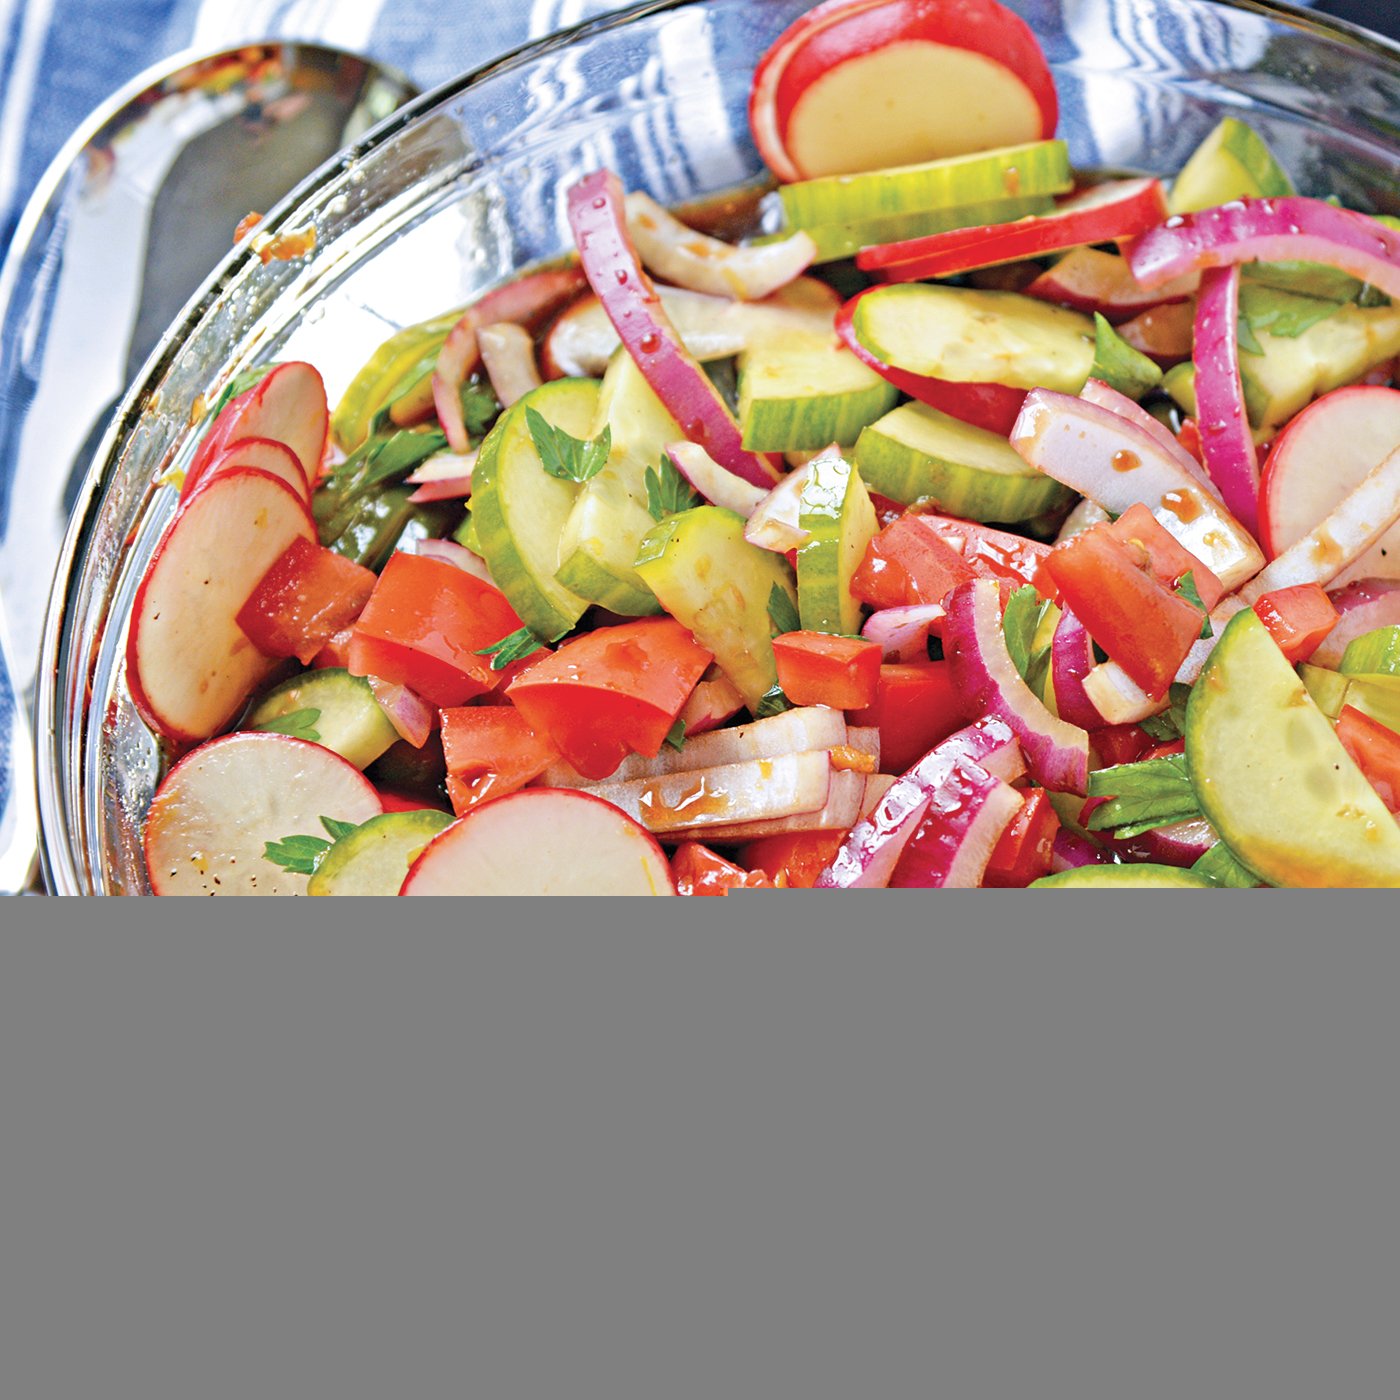 Fattoush Salad is of Arabic descent consisting of marinated vegetables, usually tomatoes and radishes, and tossed with grilled flatbread. #fattoushsalad www.savoryexperiments.com 